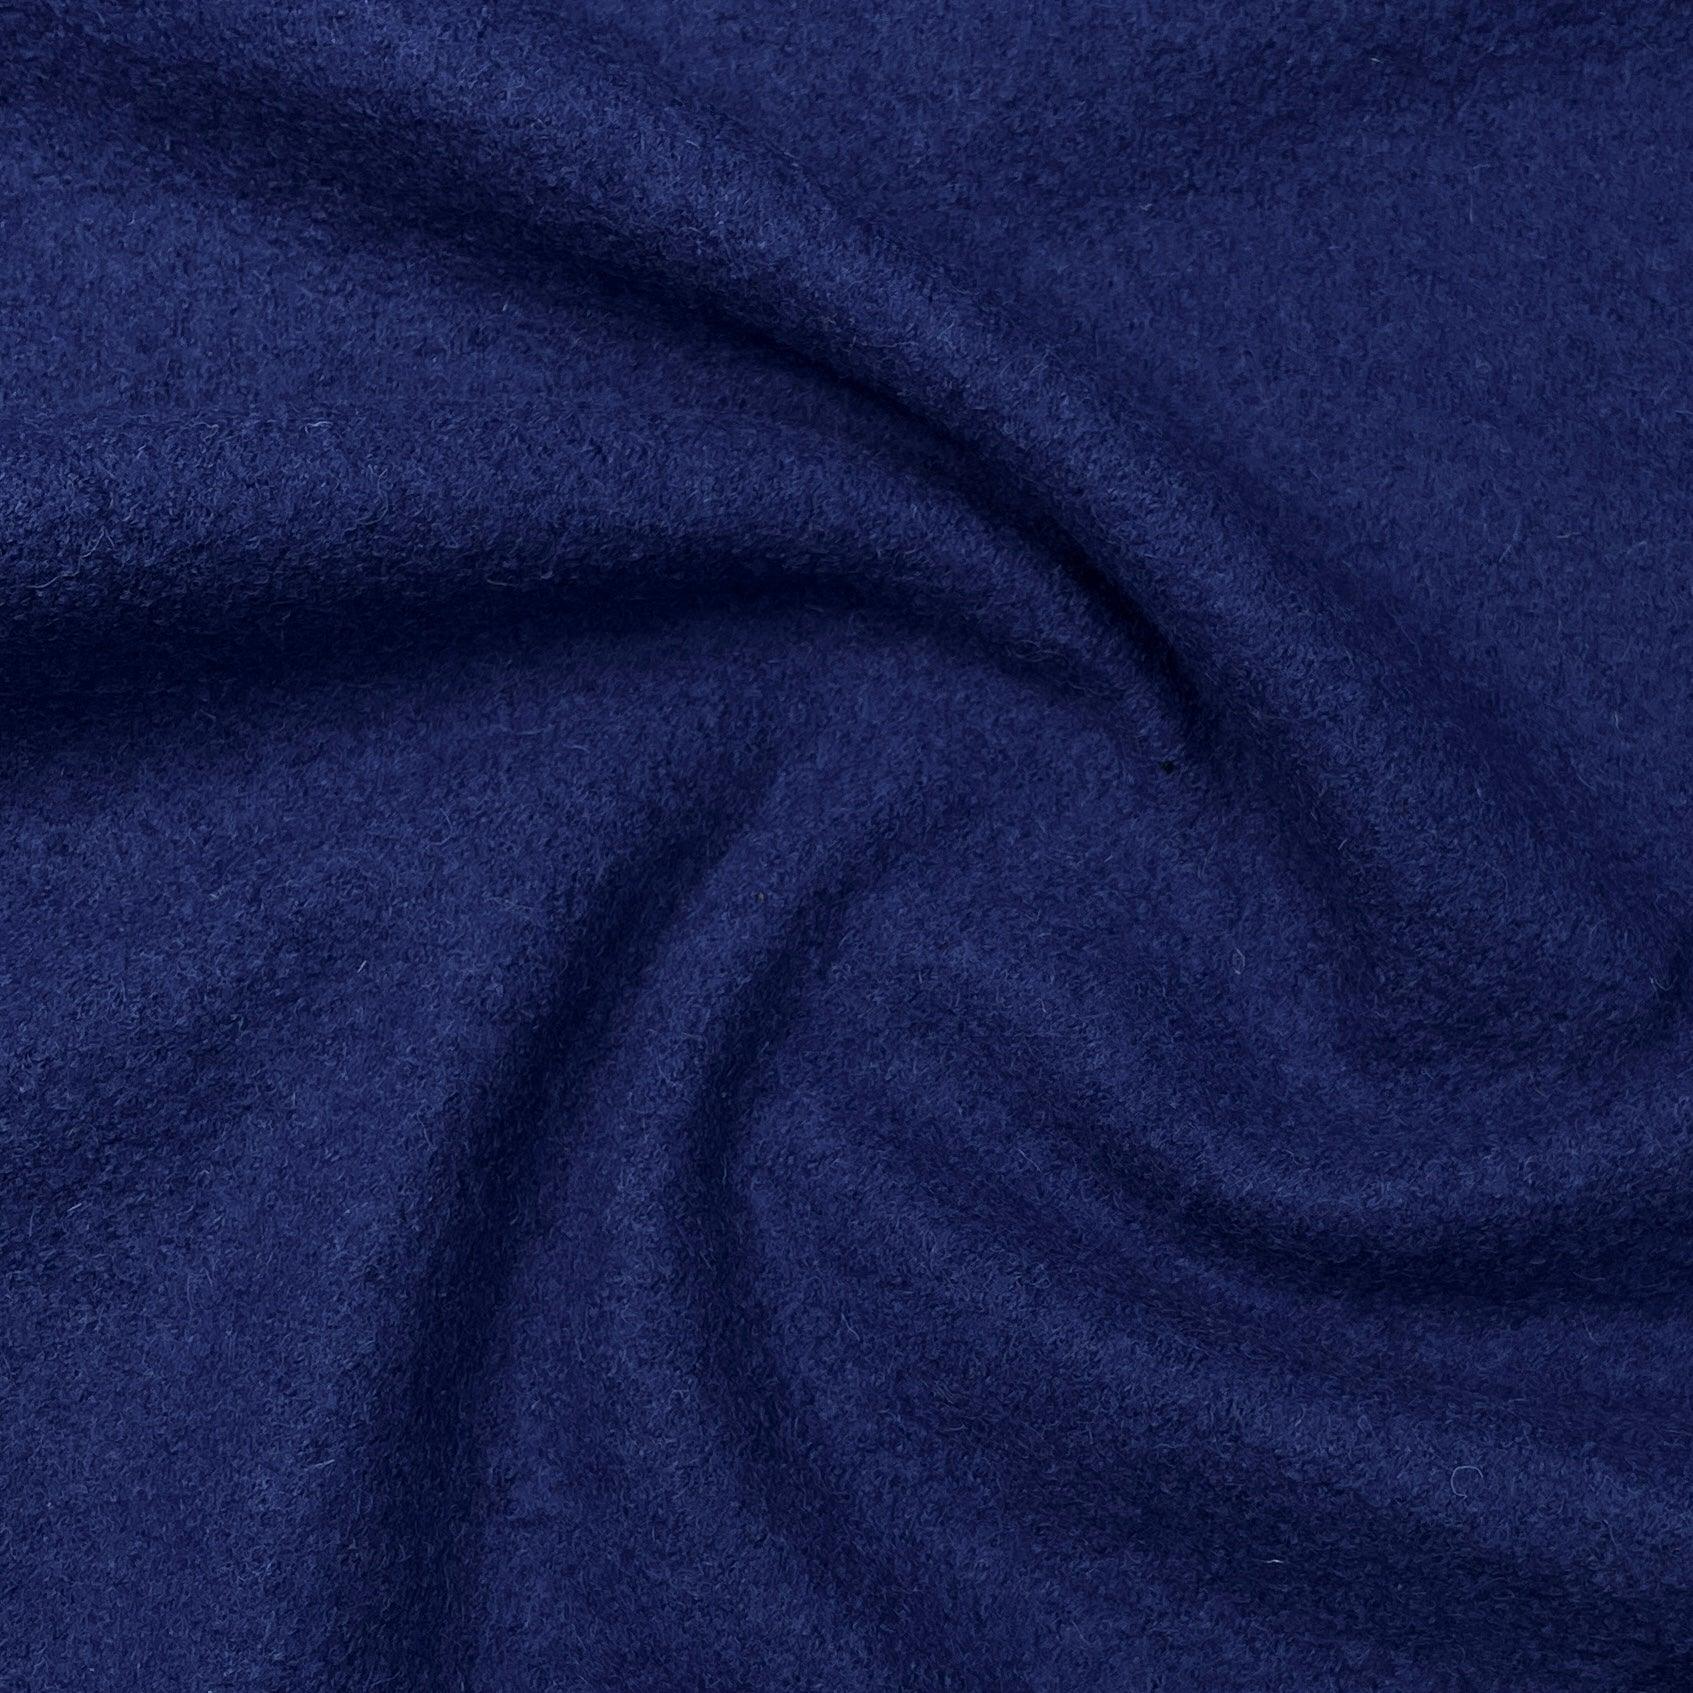 Pacific Blue Boiled Wool Fabric by Telio